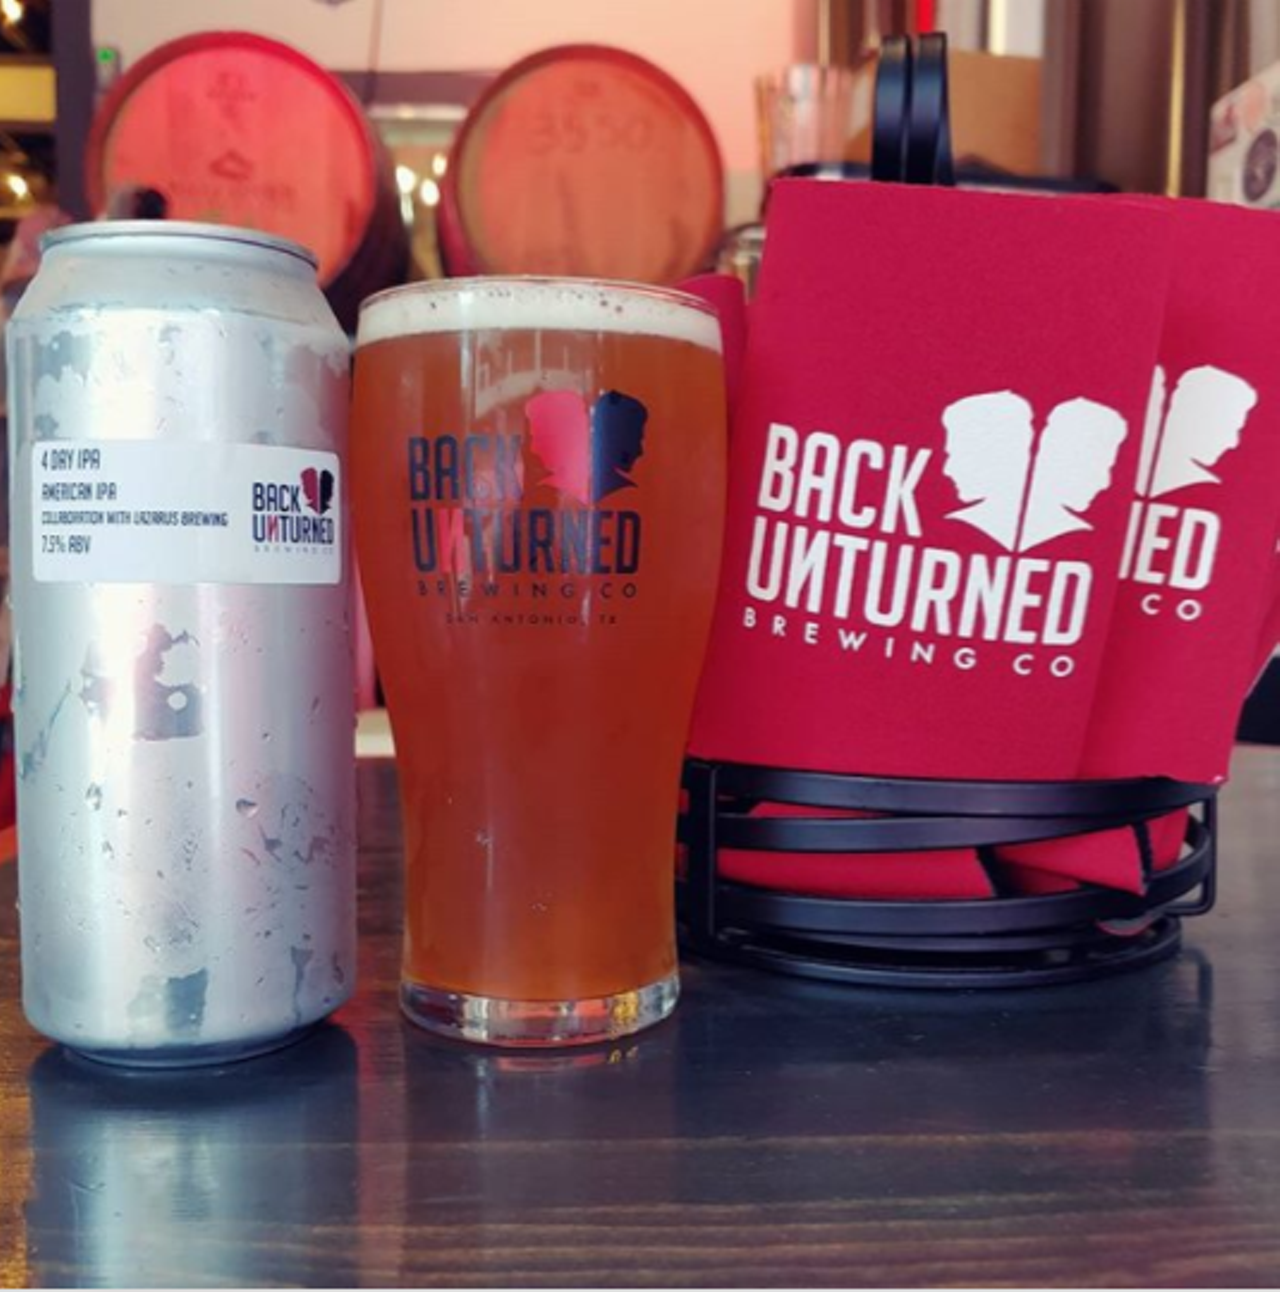 Back Unturned Brewing Co.
516 Brooklyn Ave, (210) 257-0022, backunturned.com/
Order online or over the phone. They offer not only curbside pickup, but also delivery within a 10 mile radius of their location.  Photo via Instagram /  backunturned